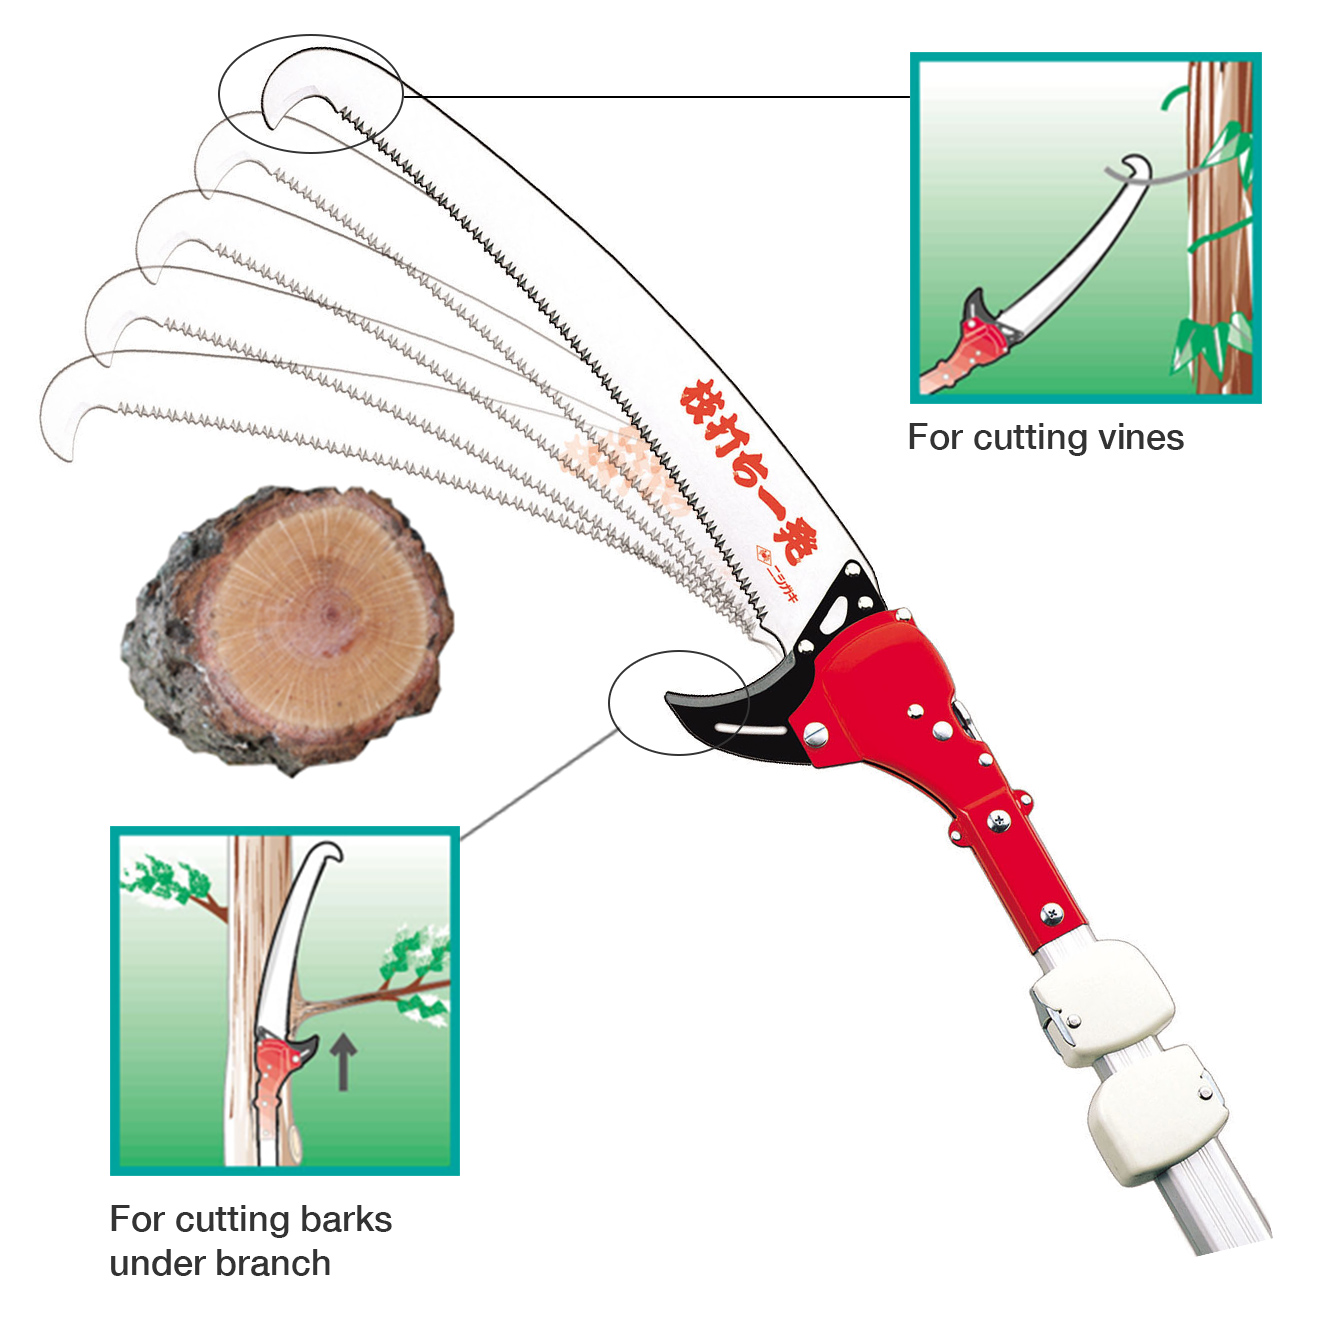 For cutting vines   For cutting barks under branch